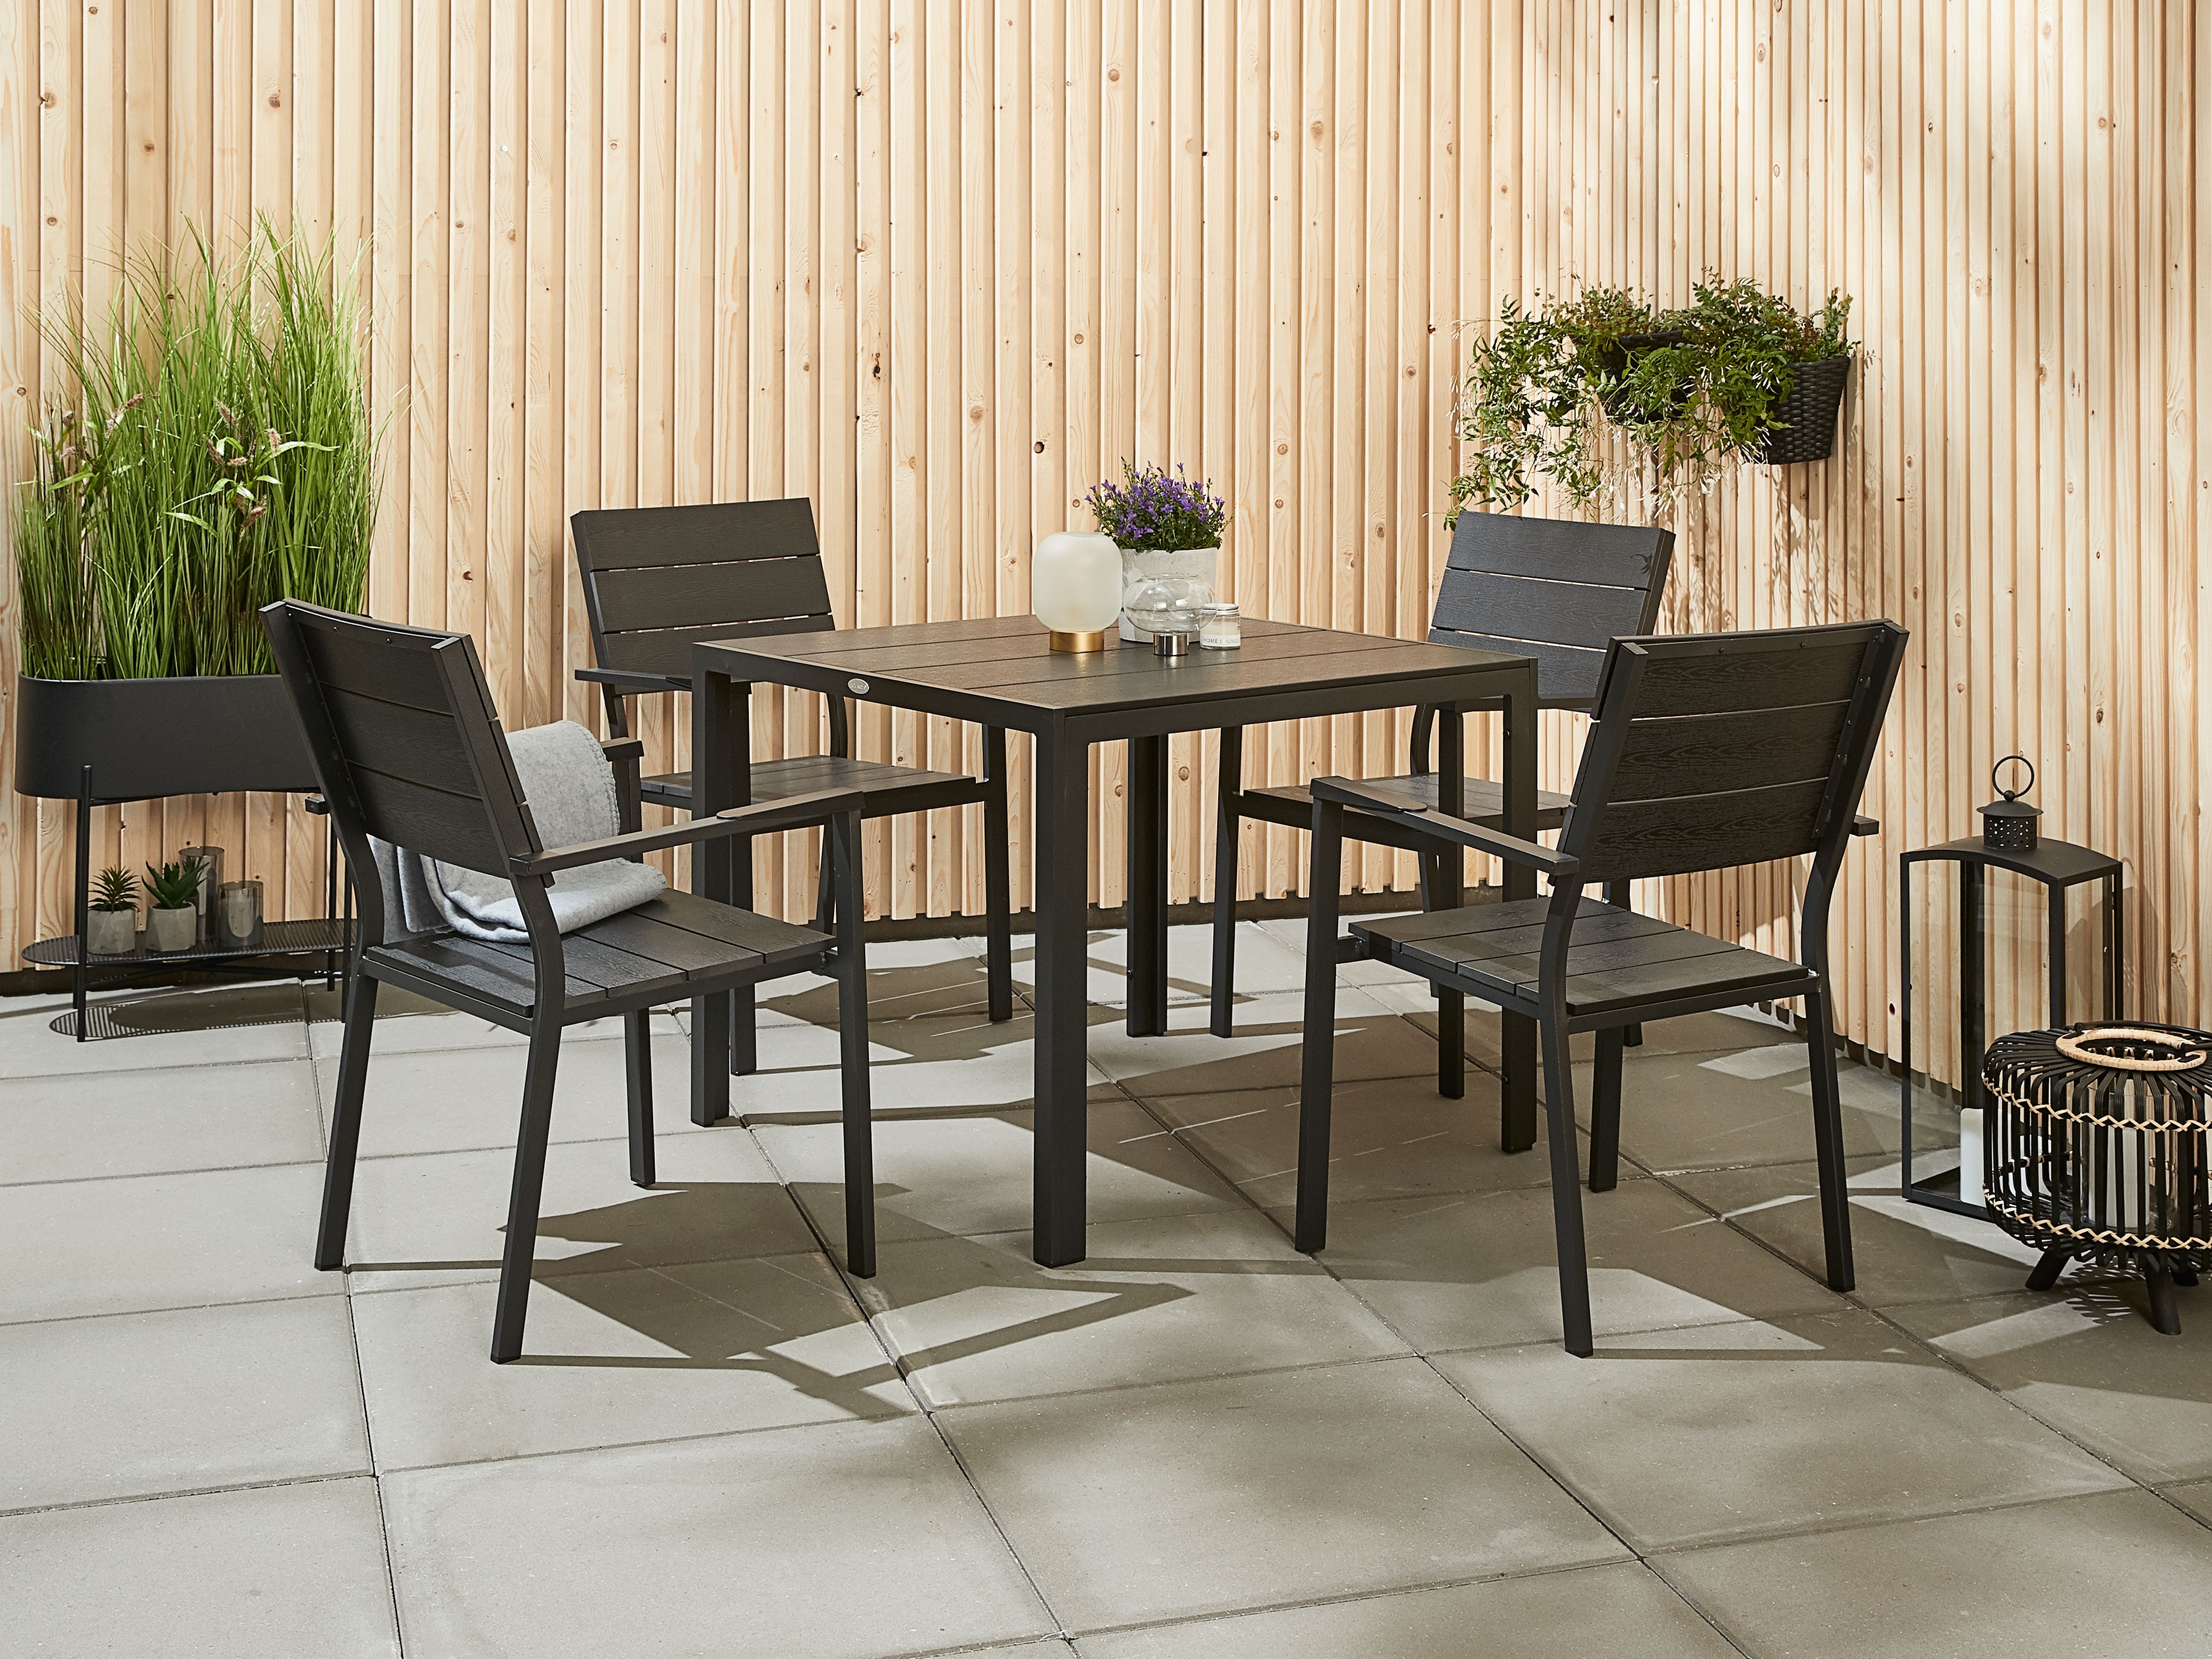 Square artwood table in black with black garden dining chairs